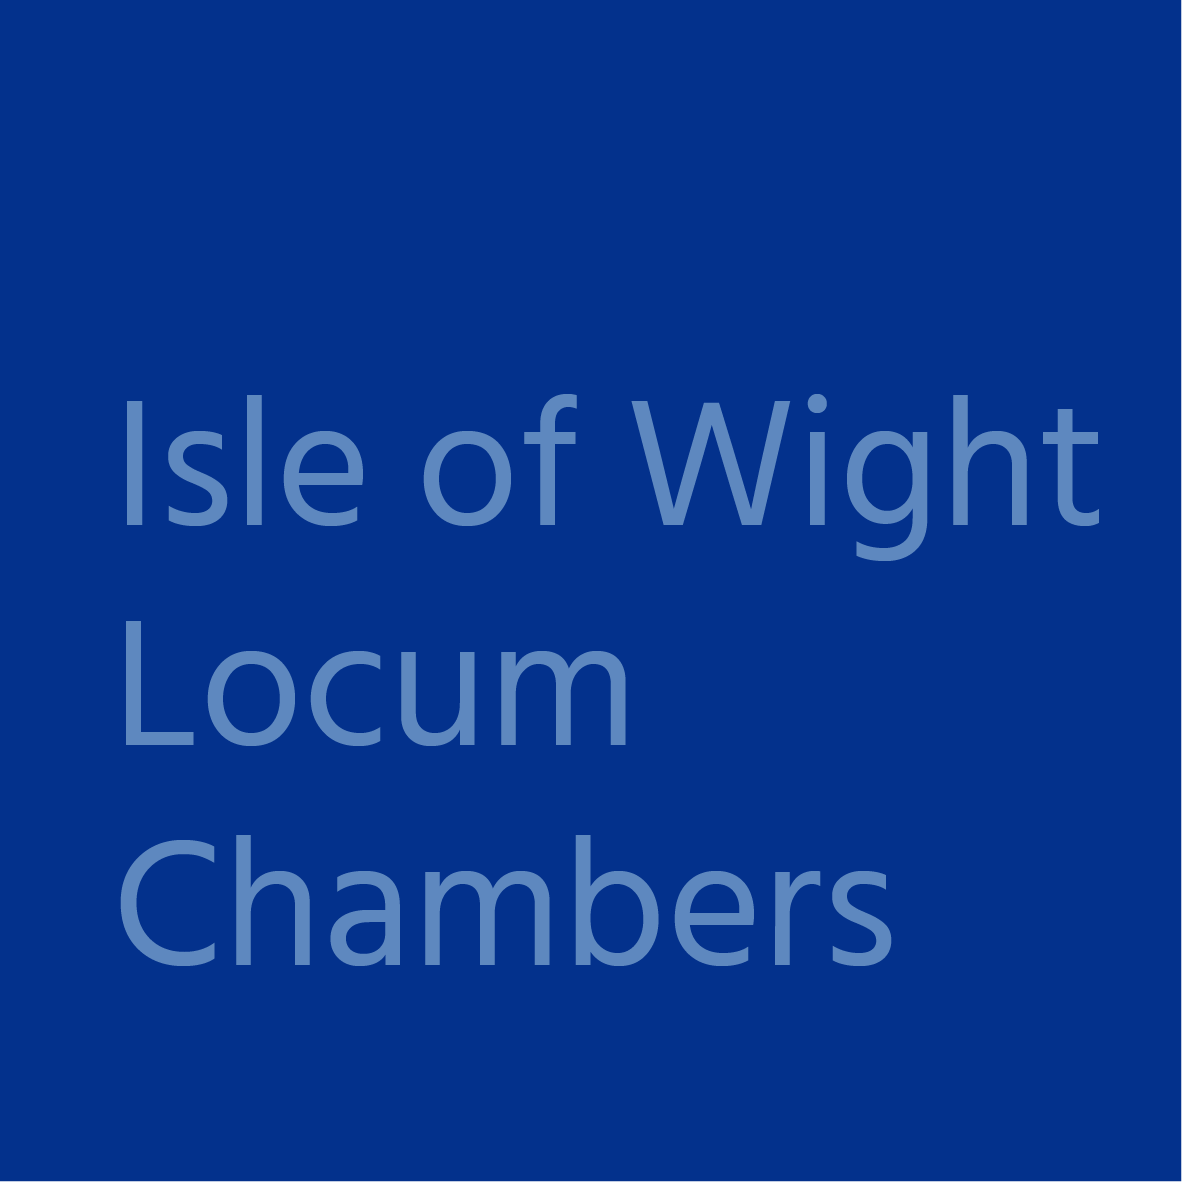 Join our fully-funded NASGP Locum Chambers on the Isle of Wight when you sign up to our partnership